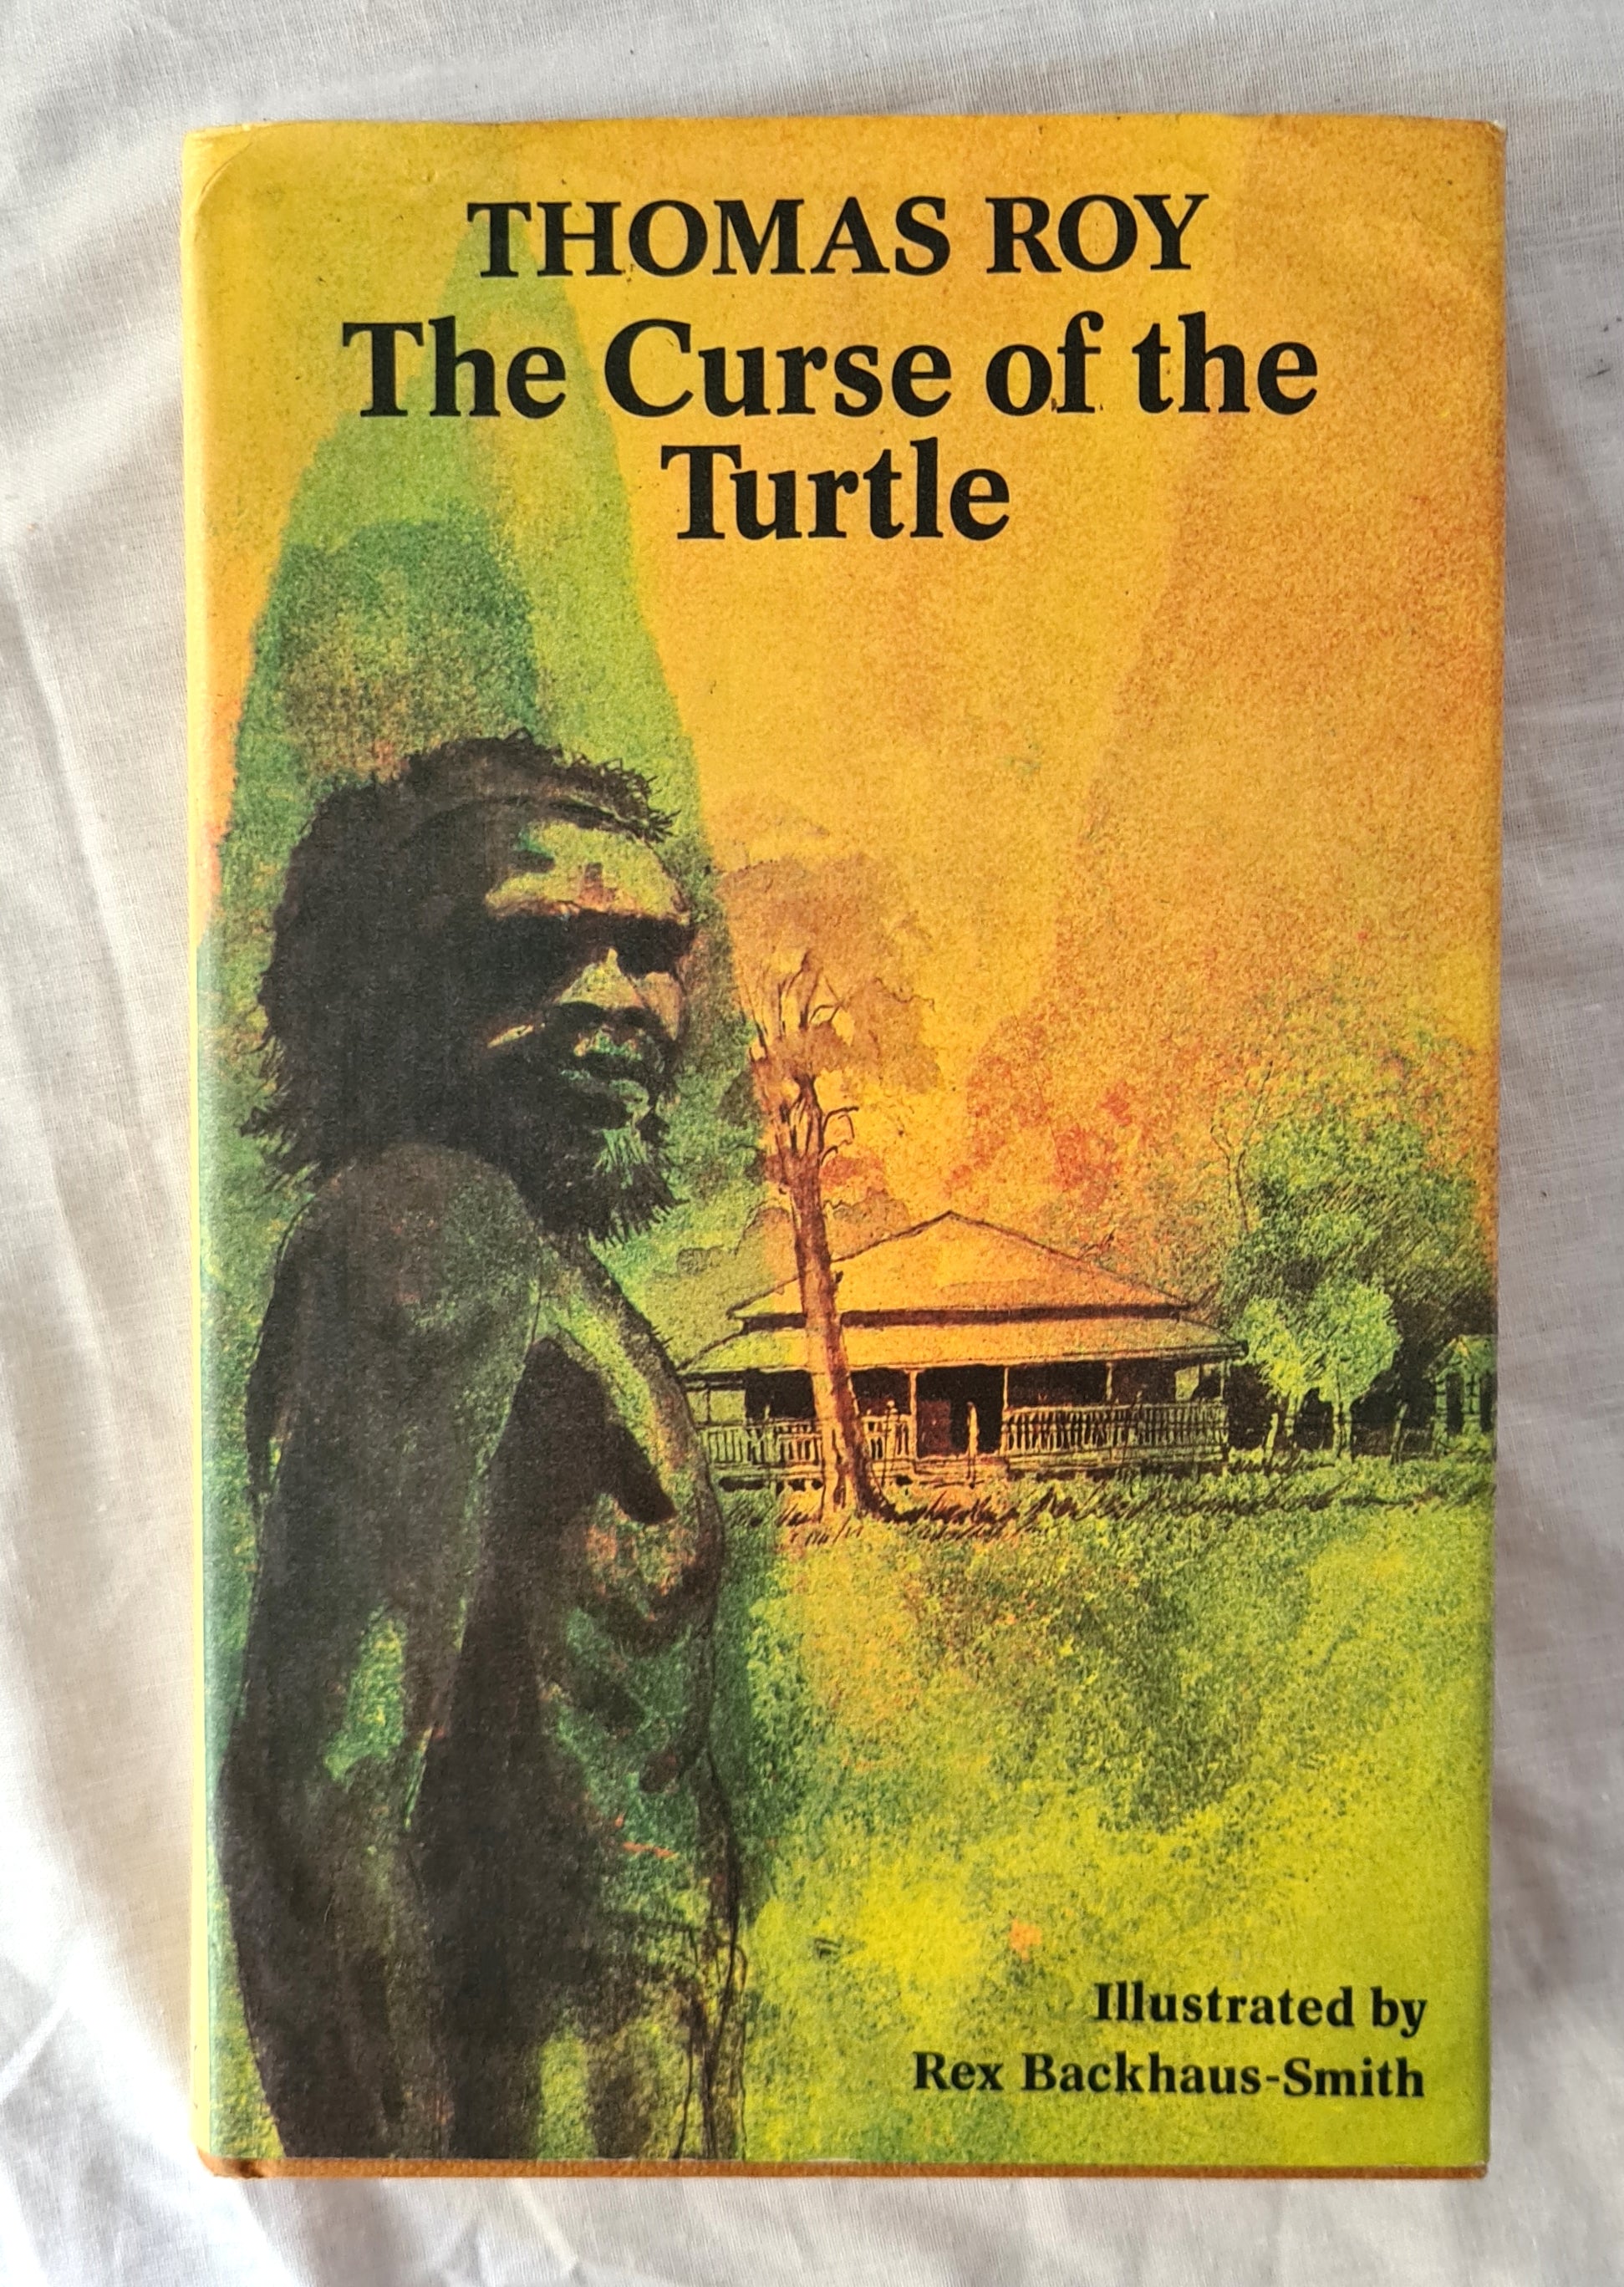 The Curse of the Turtle  by Thomas Roy  Illustrated by Rex Backhaus-Smith